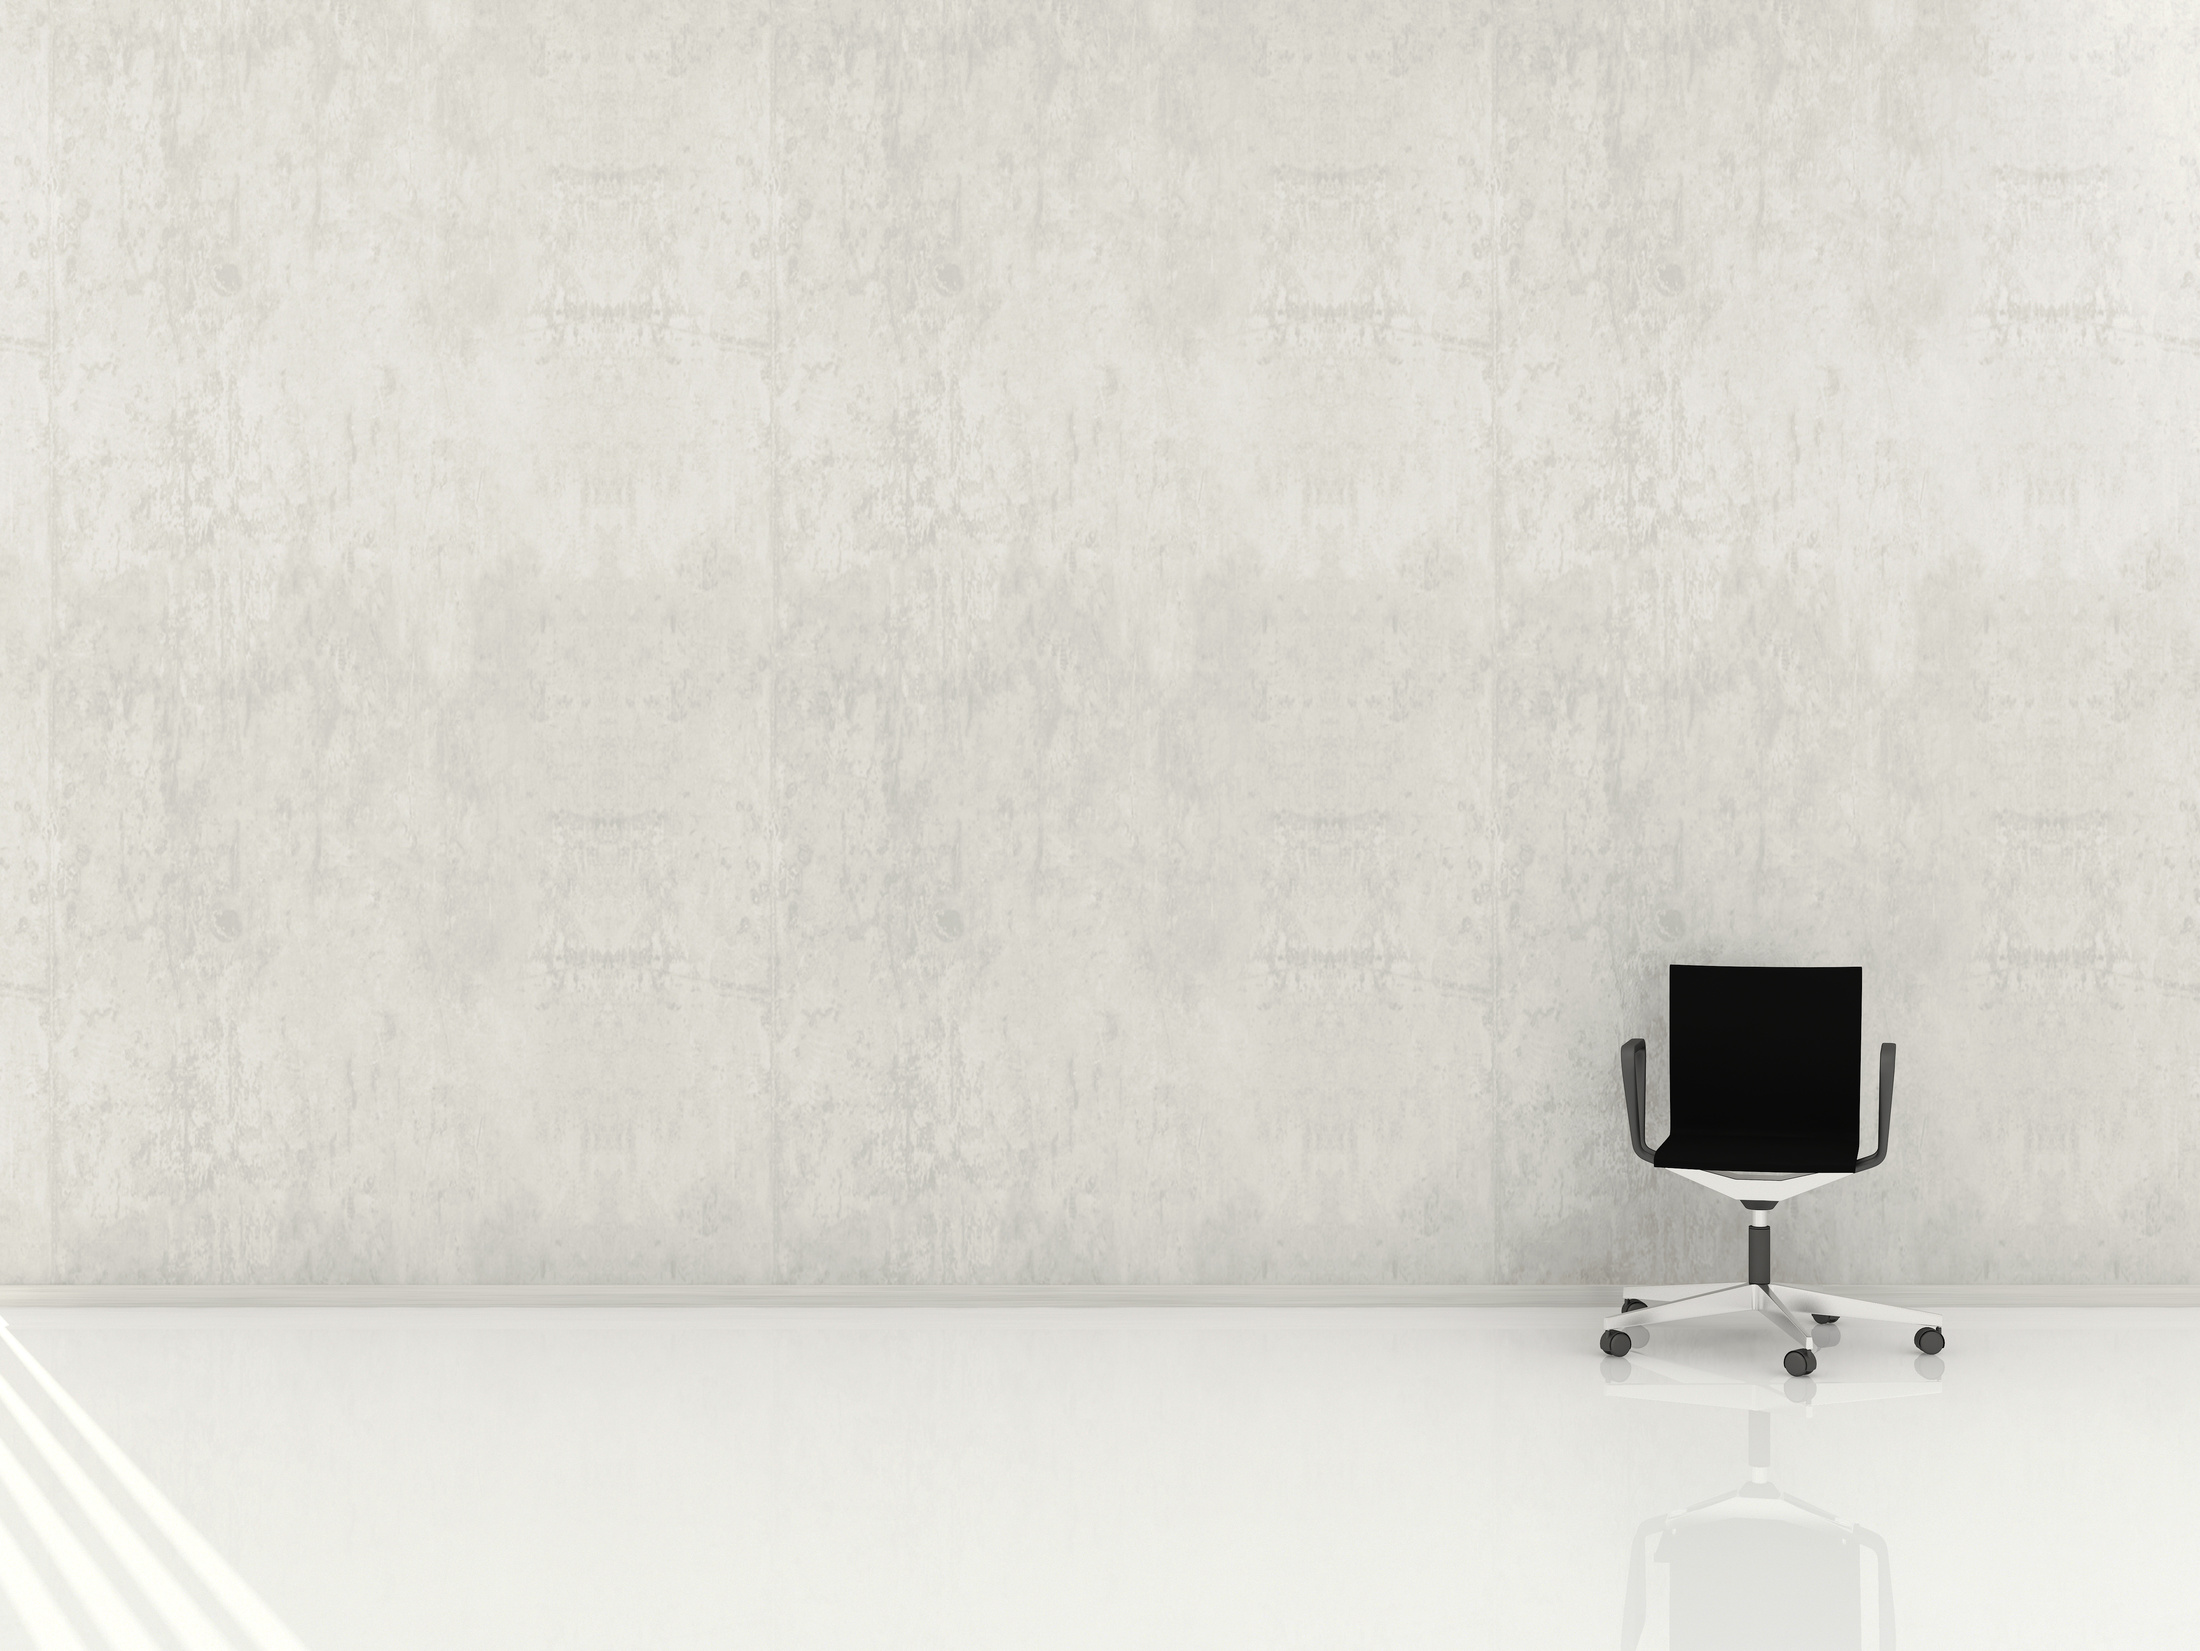 A plain white wall and floor with a small office chair